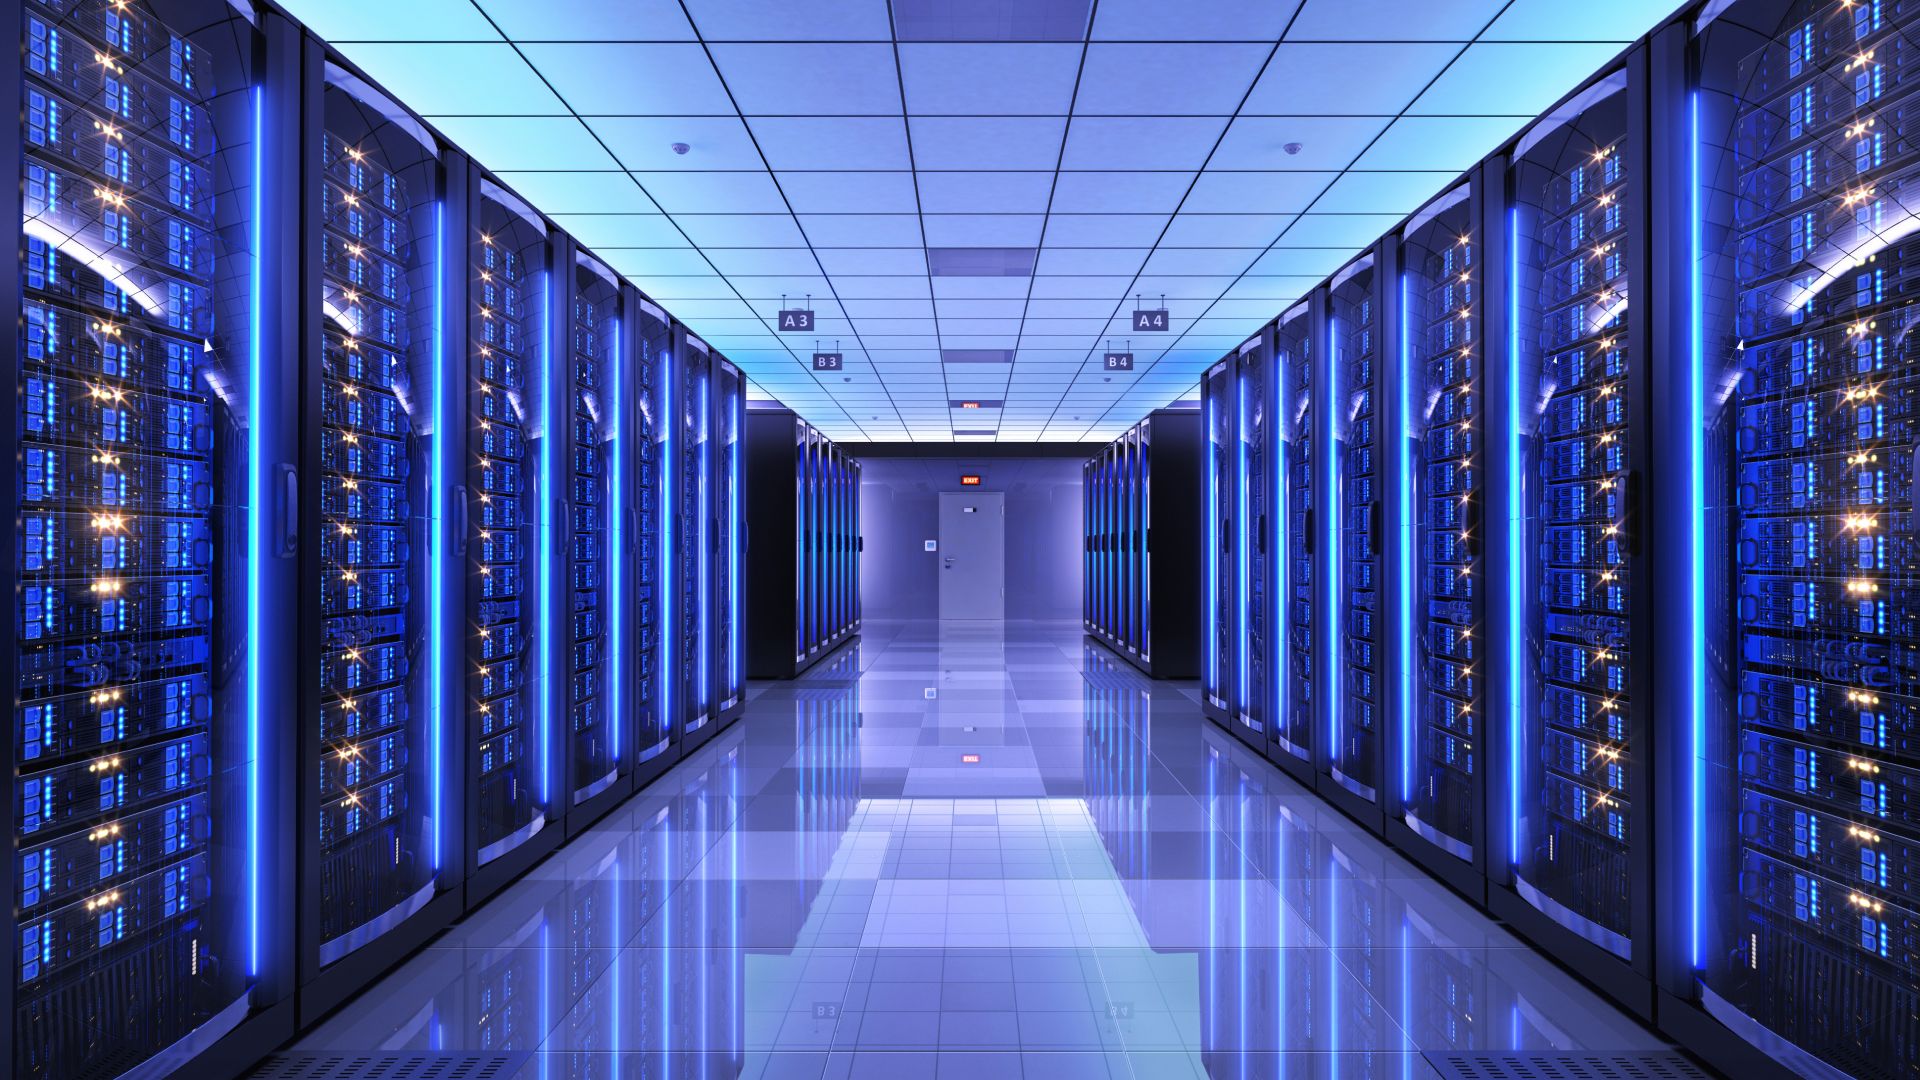 Blue lit hallways with rows of servers from the floor to the ceiling on each side . 